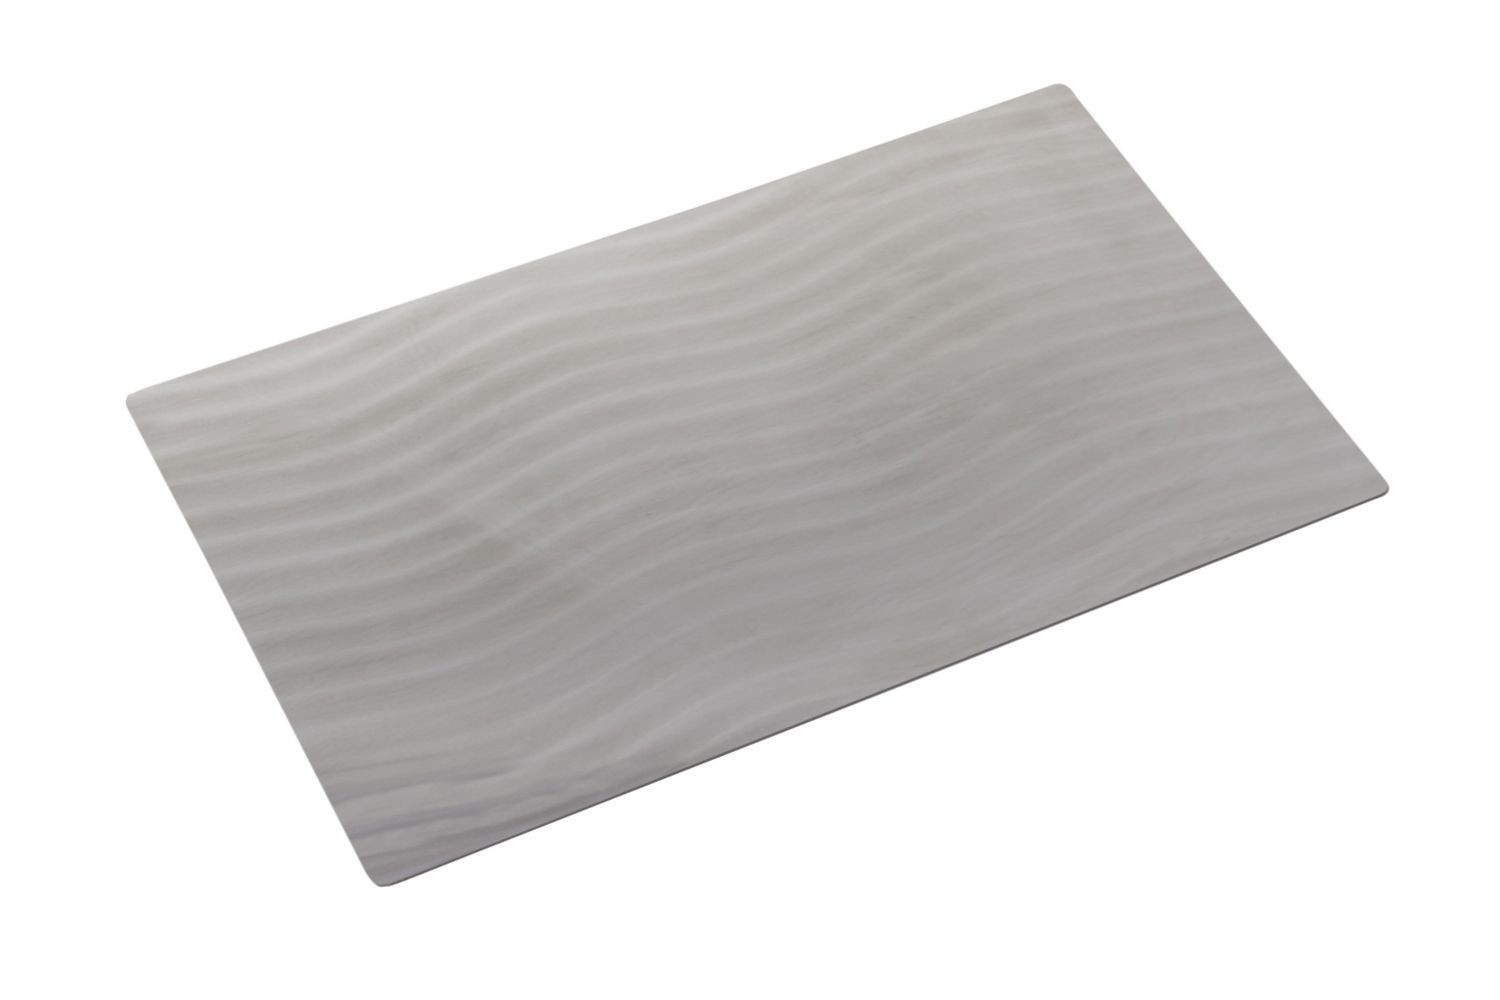 Bon Chef 52105 EZ Fit Stainless Steel Full Size Tile with Swirls, 12 3/4" x 20 13/16"